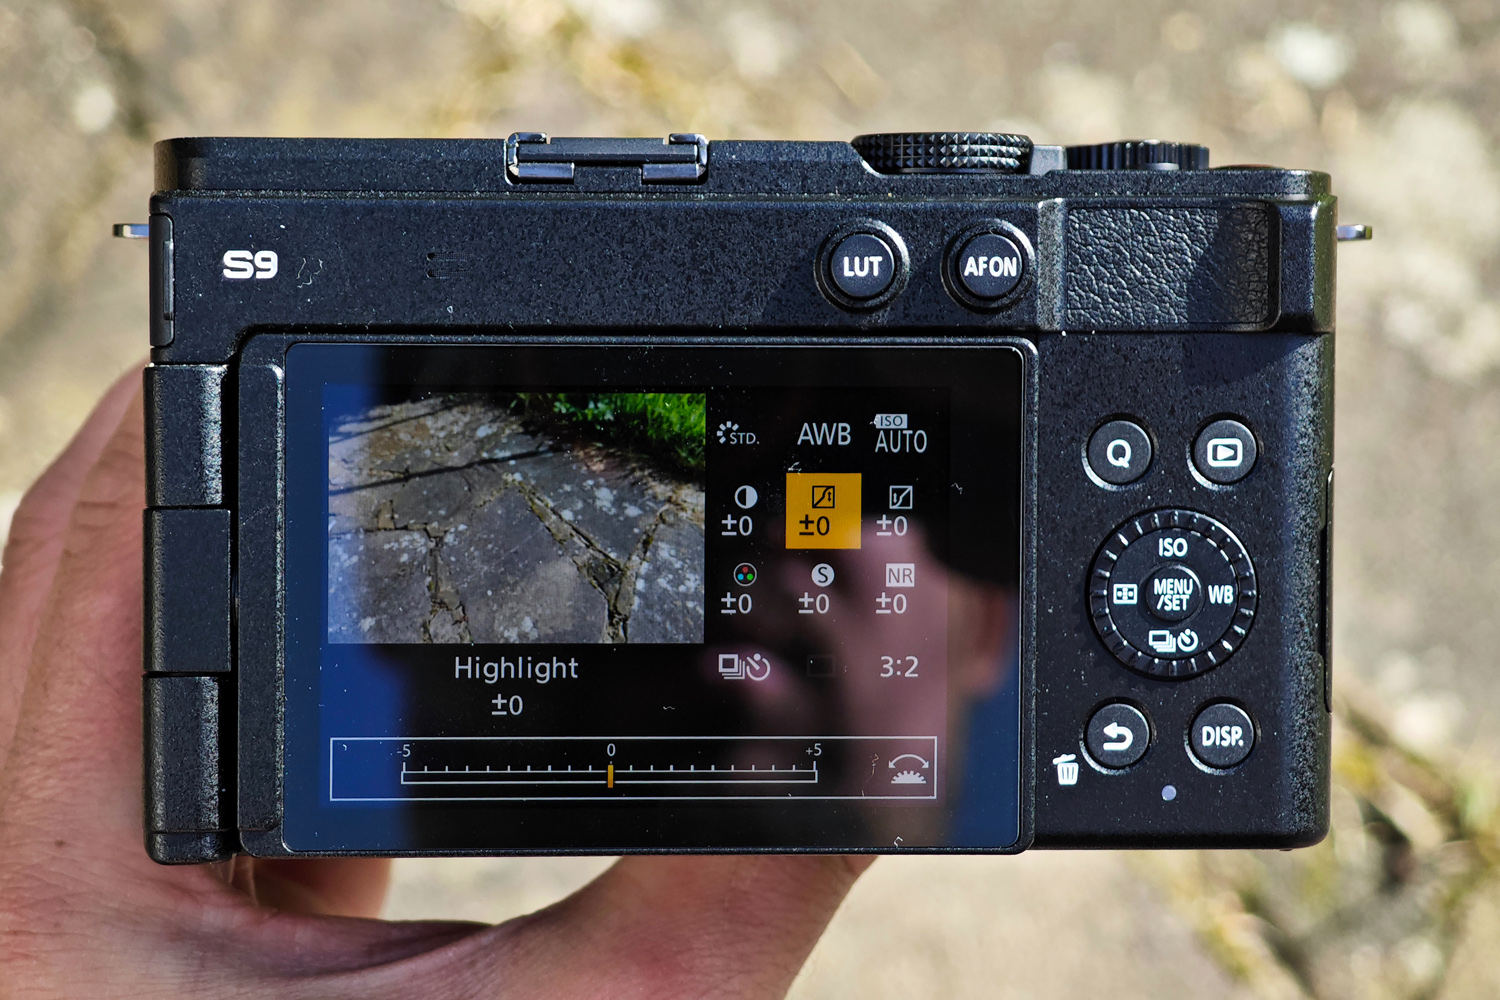 Panasonic Lumix S9 review in hand rear